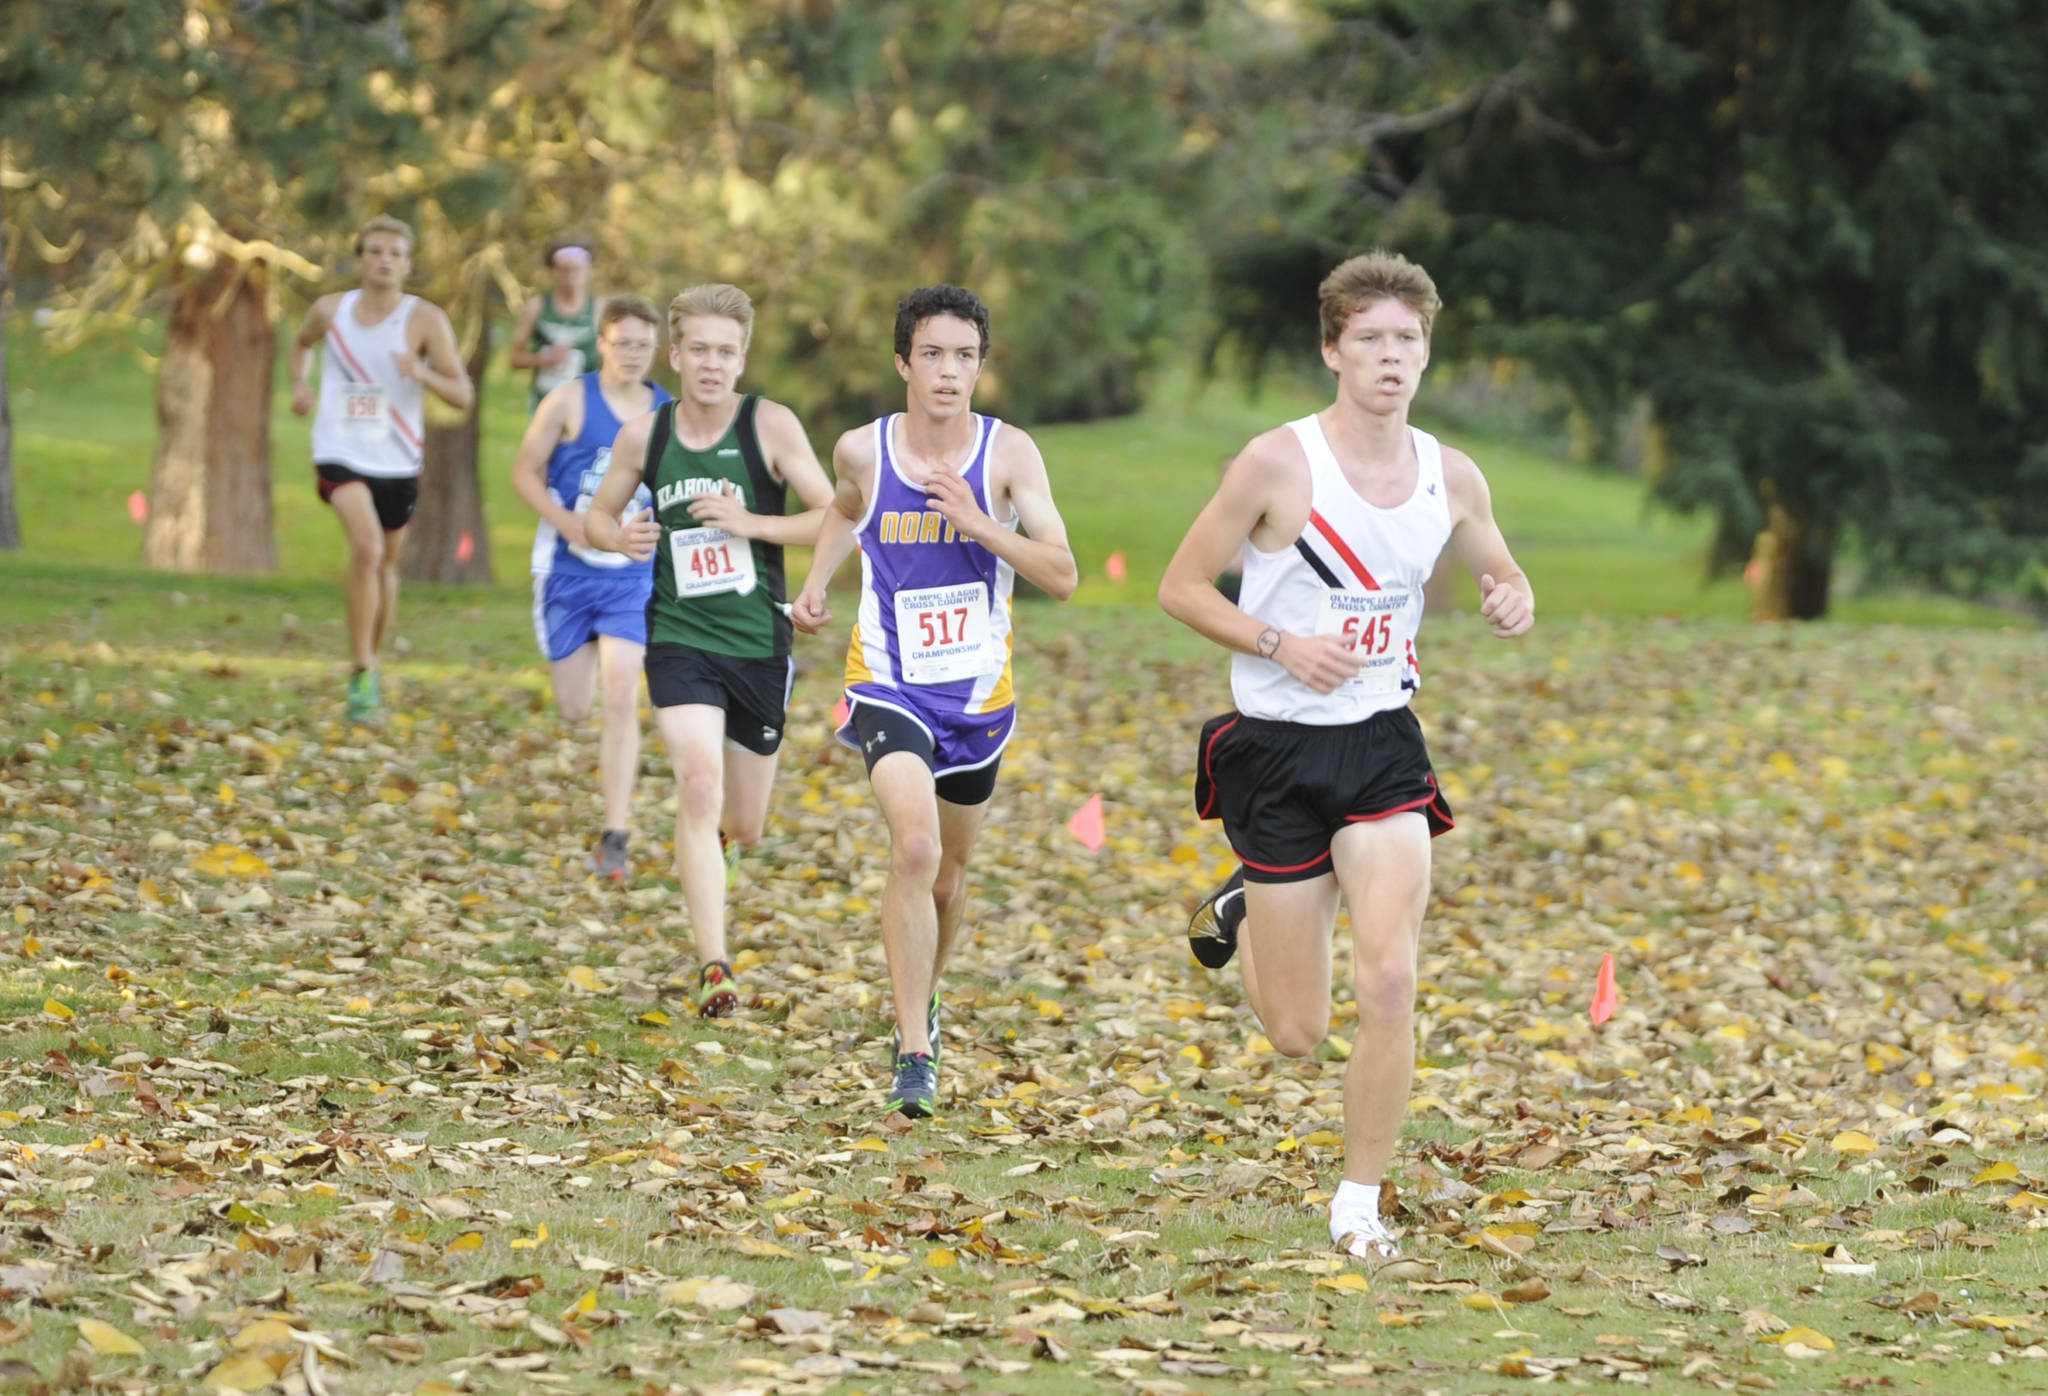 North Kitsap’s Max Metters and Klahowya’s Jaeden Ellis were among the top boys finishers in the 2A district race. (Michael Dashiell/Sequim Gazette)